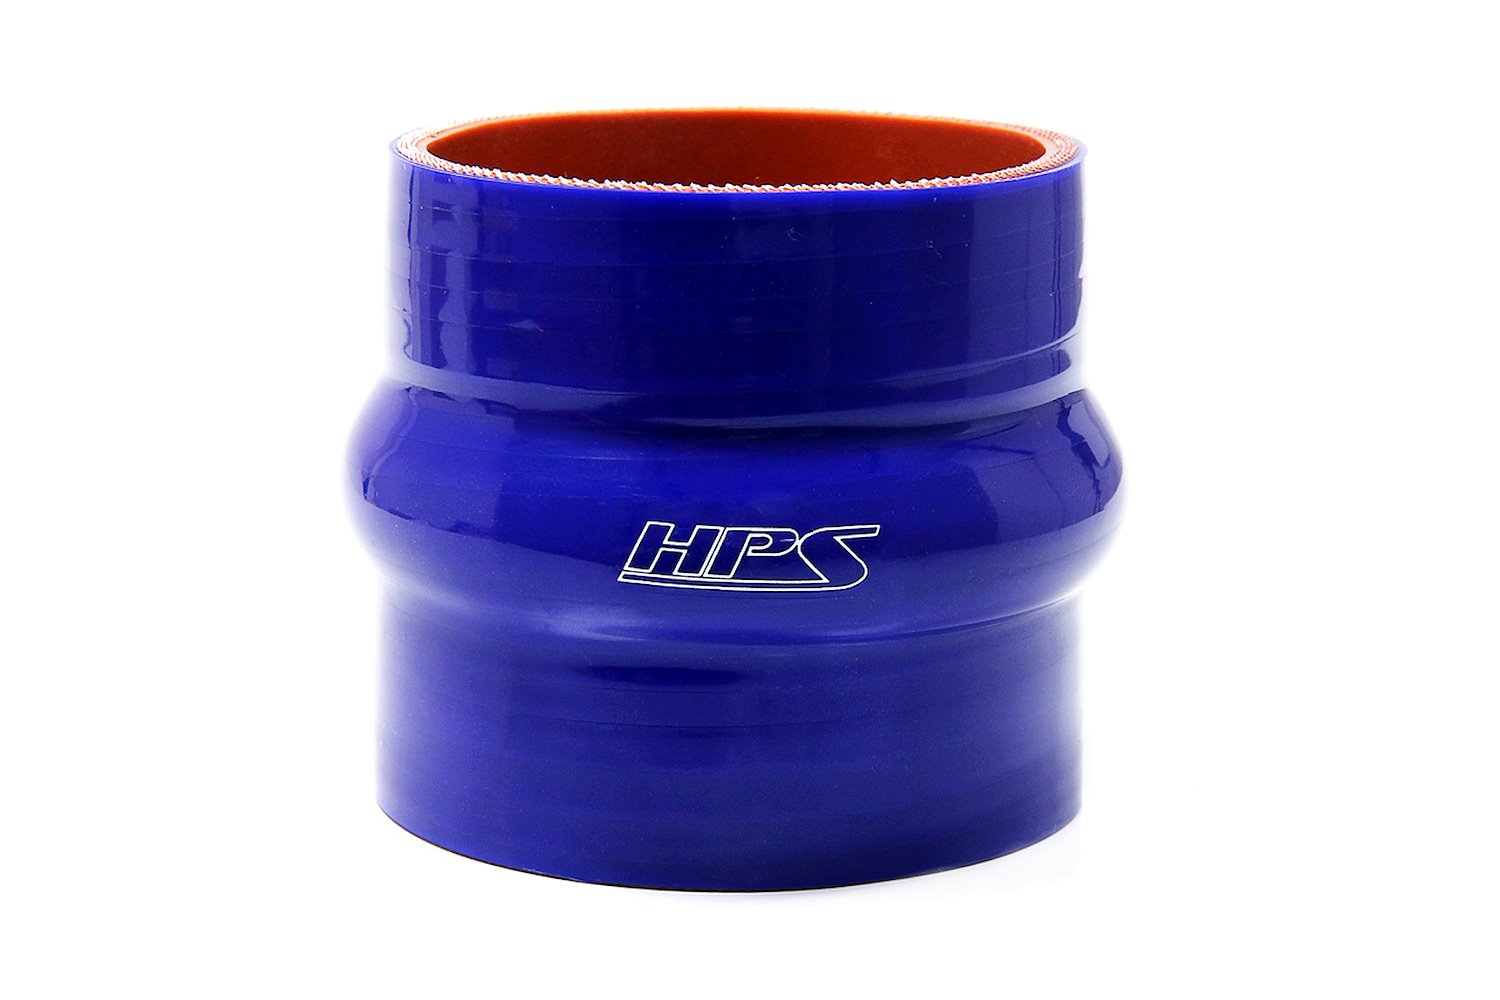 HTSHC-050-L6-BLUE Silicone Hump Coupler Hose, High-Temp 4-Ply Reinforced, 1/2 in. ID, 6 in. Long, Blue